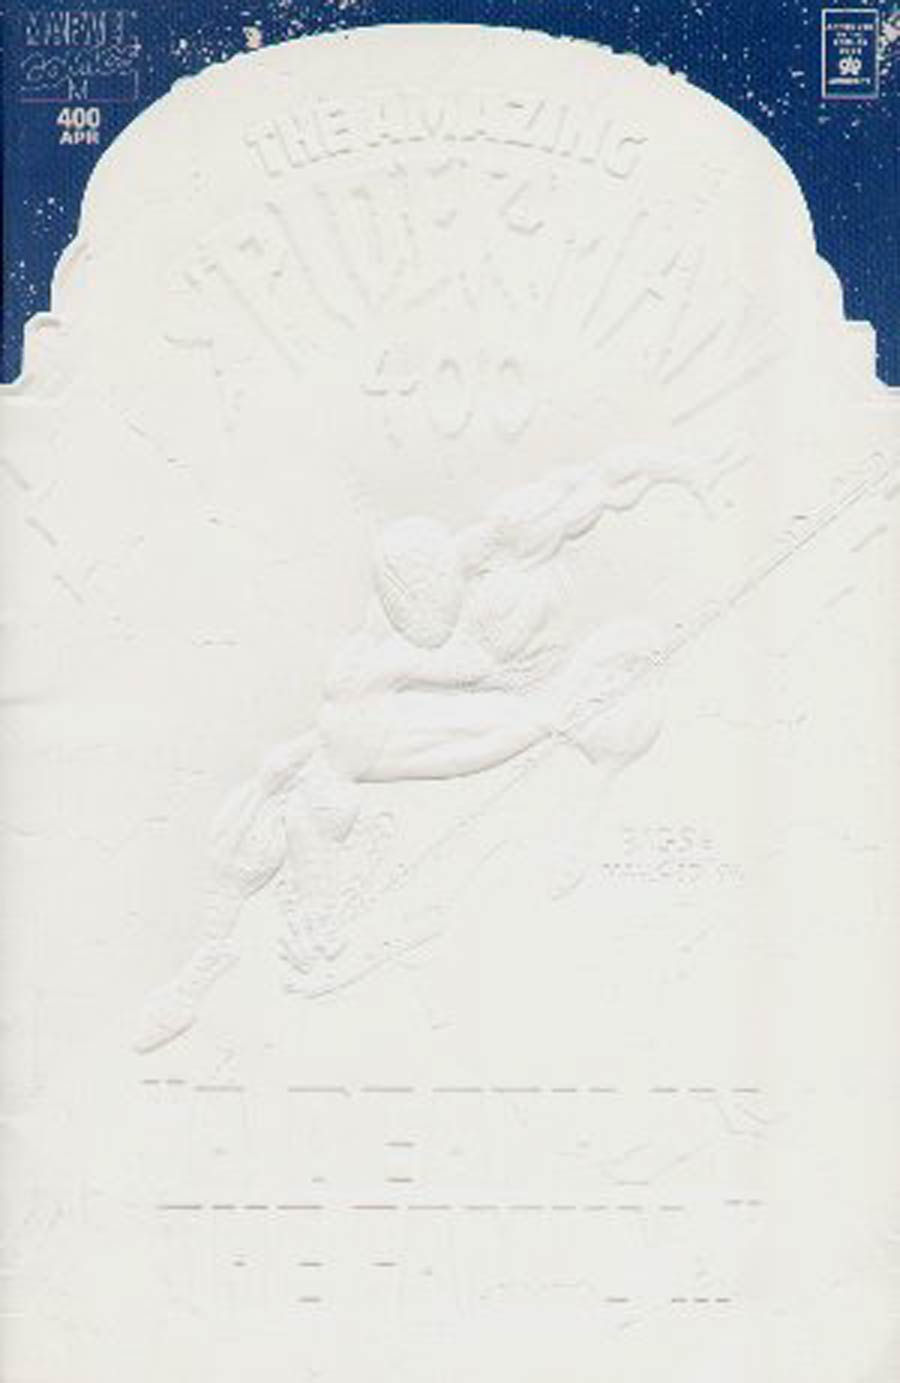 Amazing Spider-Man #400 Cover C Collectors Edition White Embossed Cover